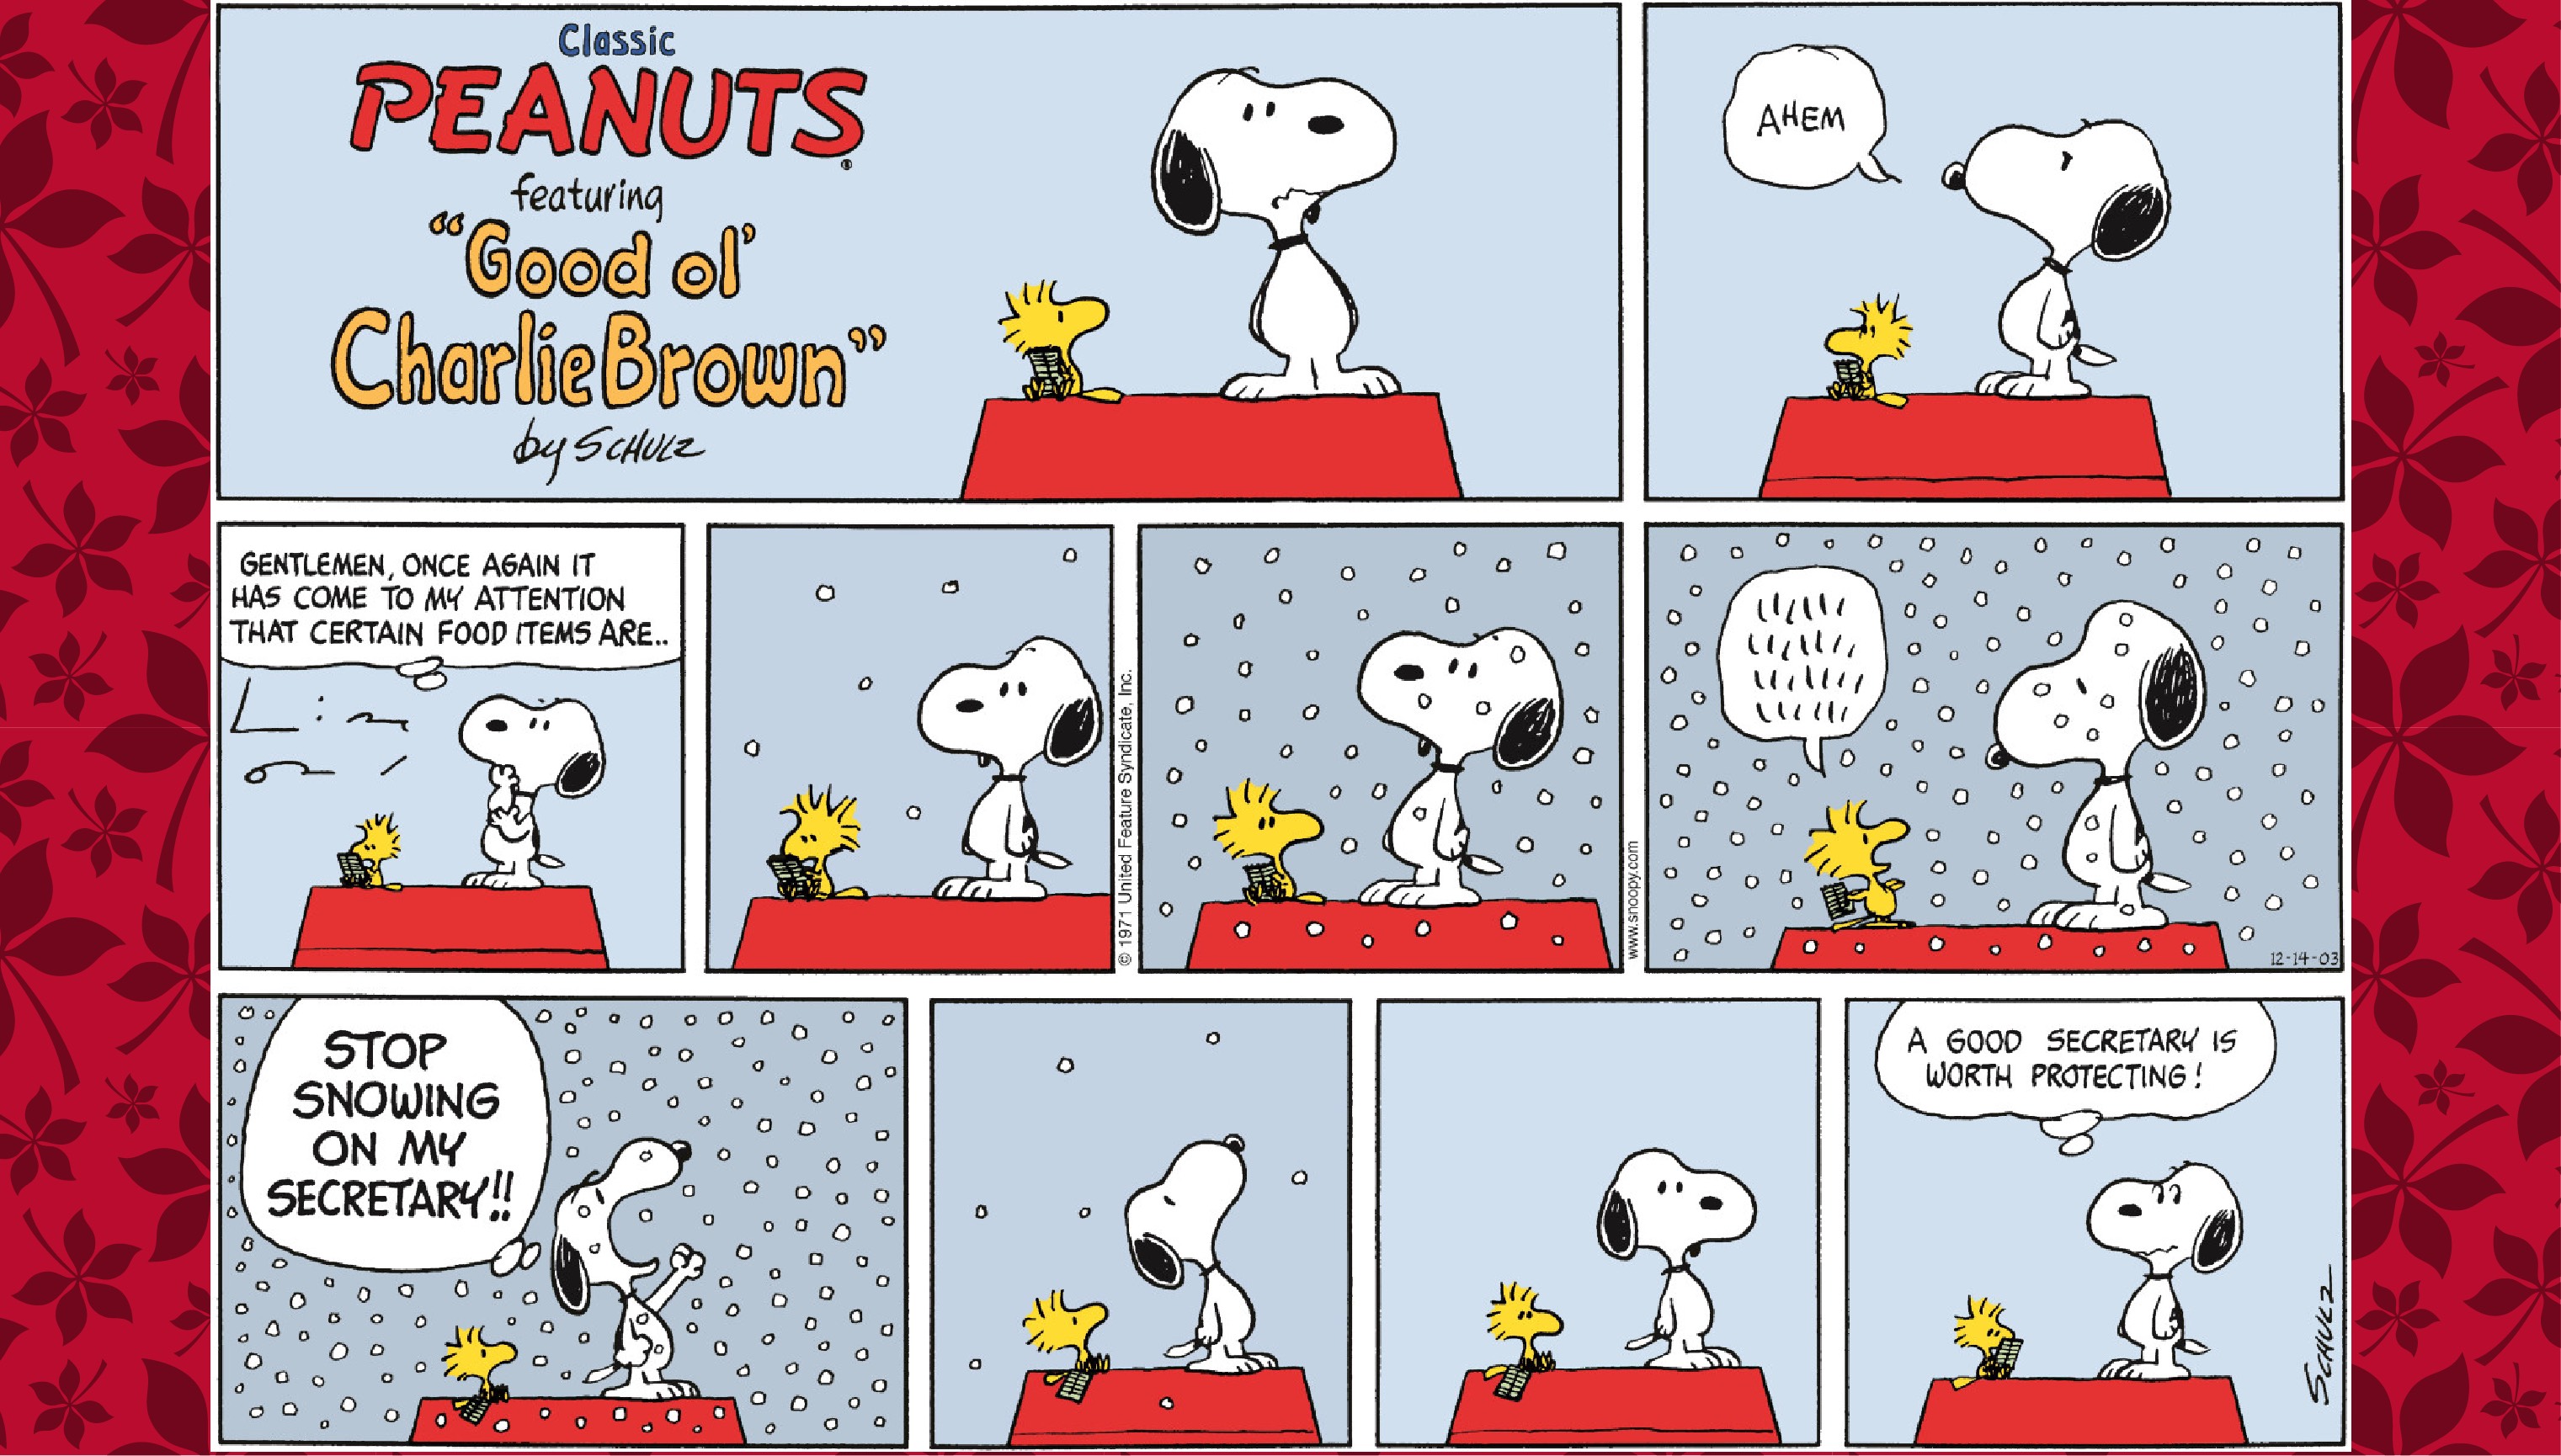 Peanuts comic strip featuring Snoopy and Woodstock